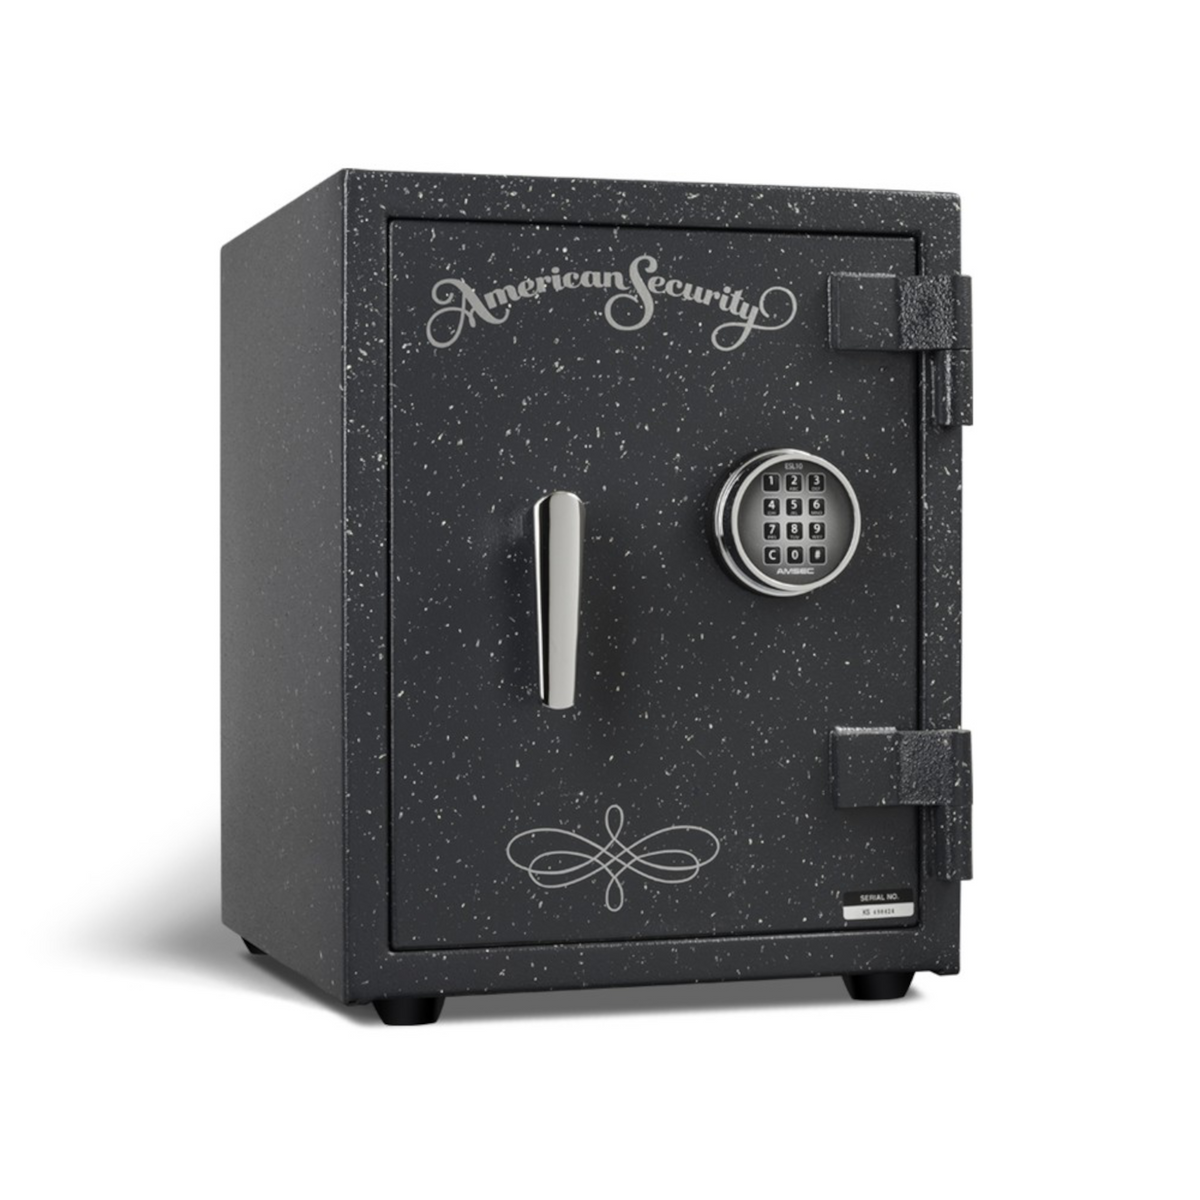 AMSEC UL Series Home Safes | 2 Hour Fire Rating